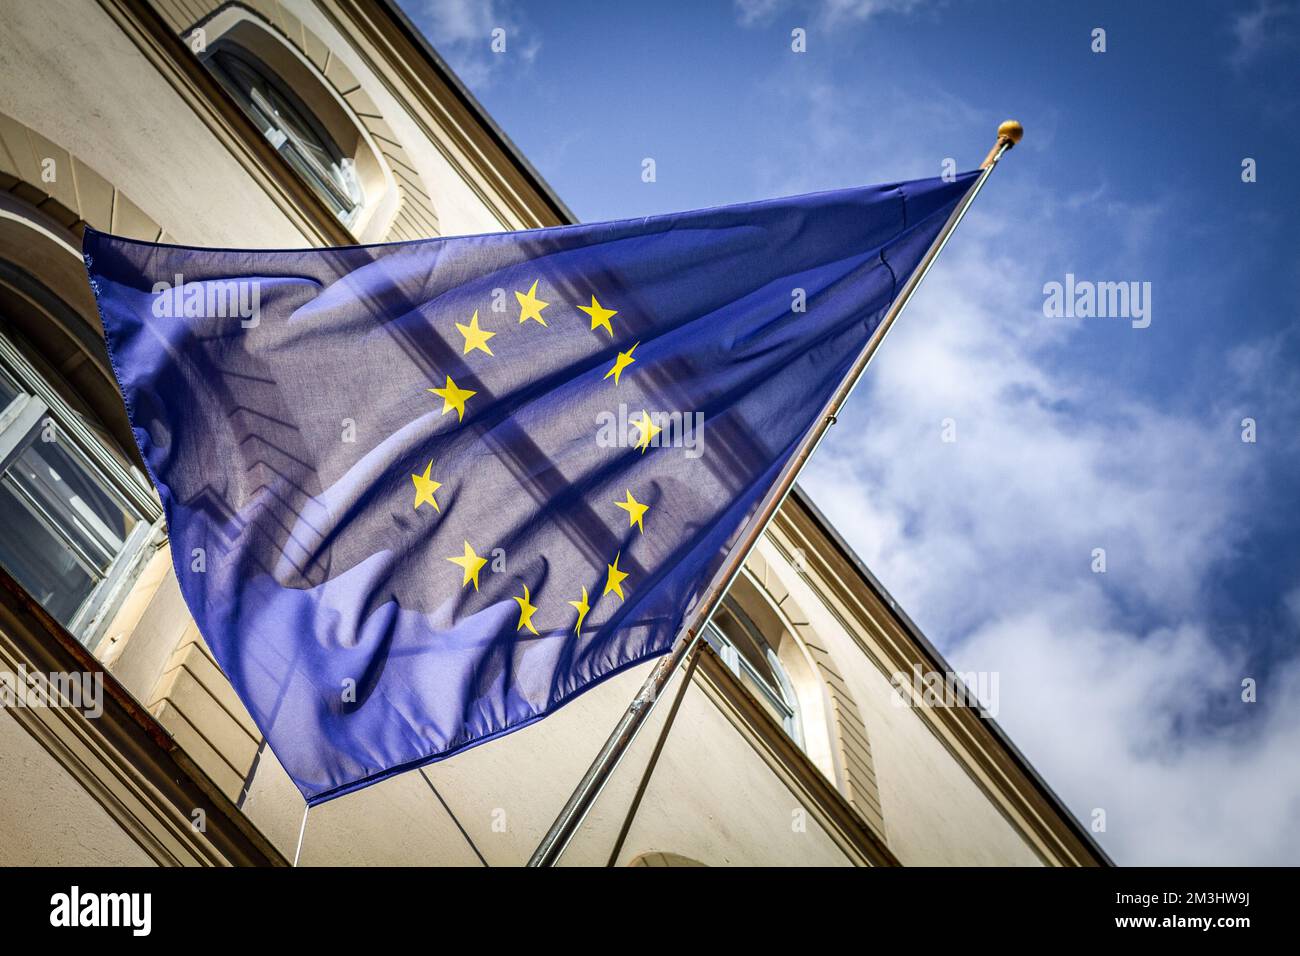 The EU Flag in front of a Building, Munich Stock Photo